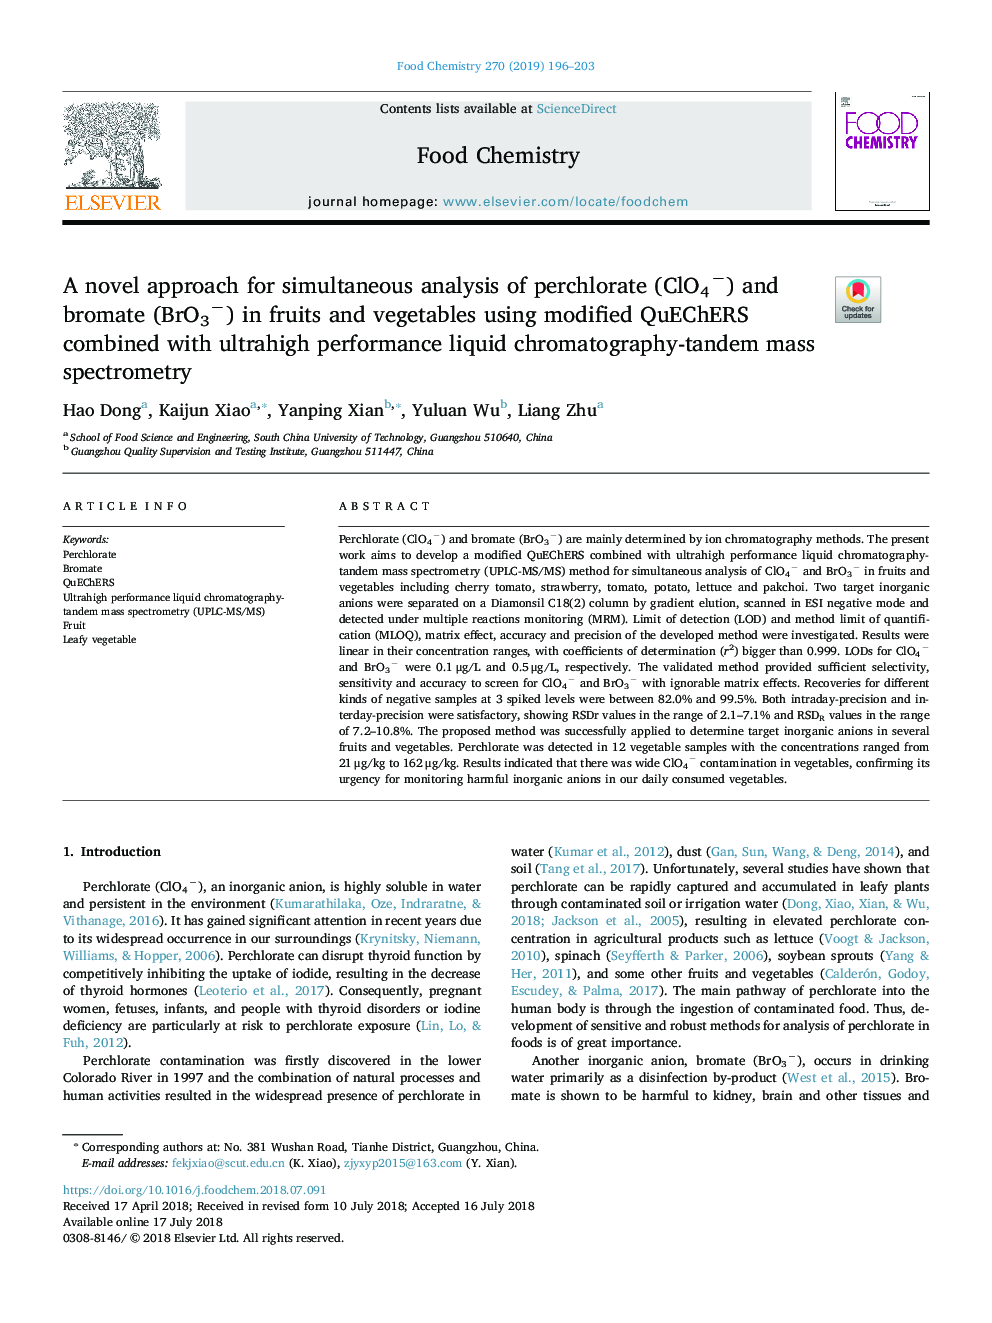 A novel approach for simultaneous analysis of perchlorate (ClO4â) and bromate (BrO3â) in fruits and vegetables using modified QuEChERS combined with ultrahigh performance liquid chromatography-tandem mass spectrometry